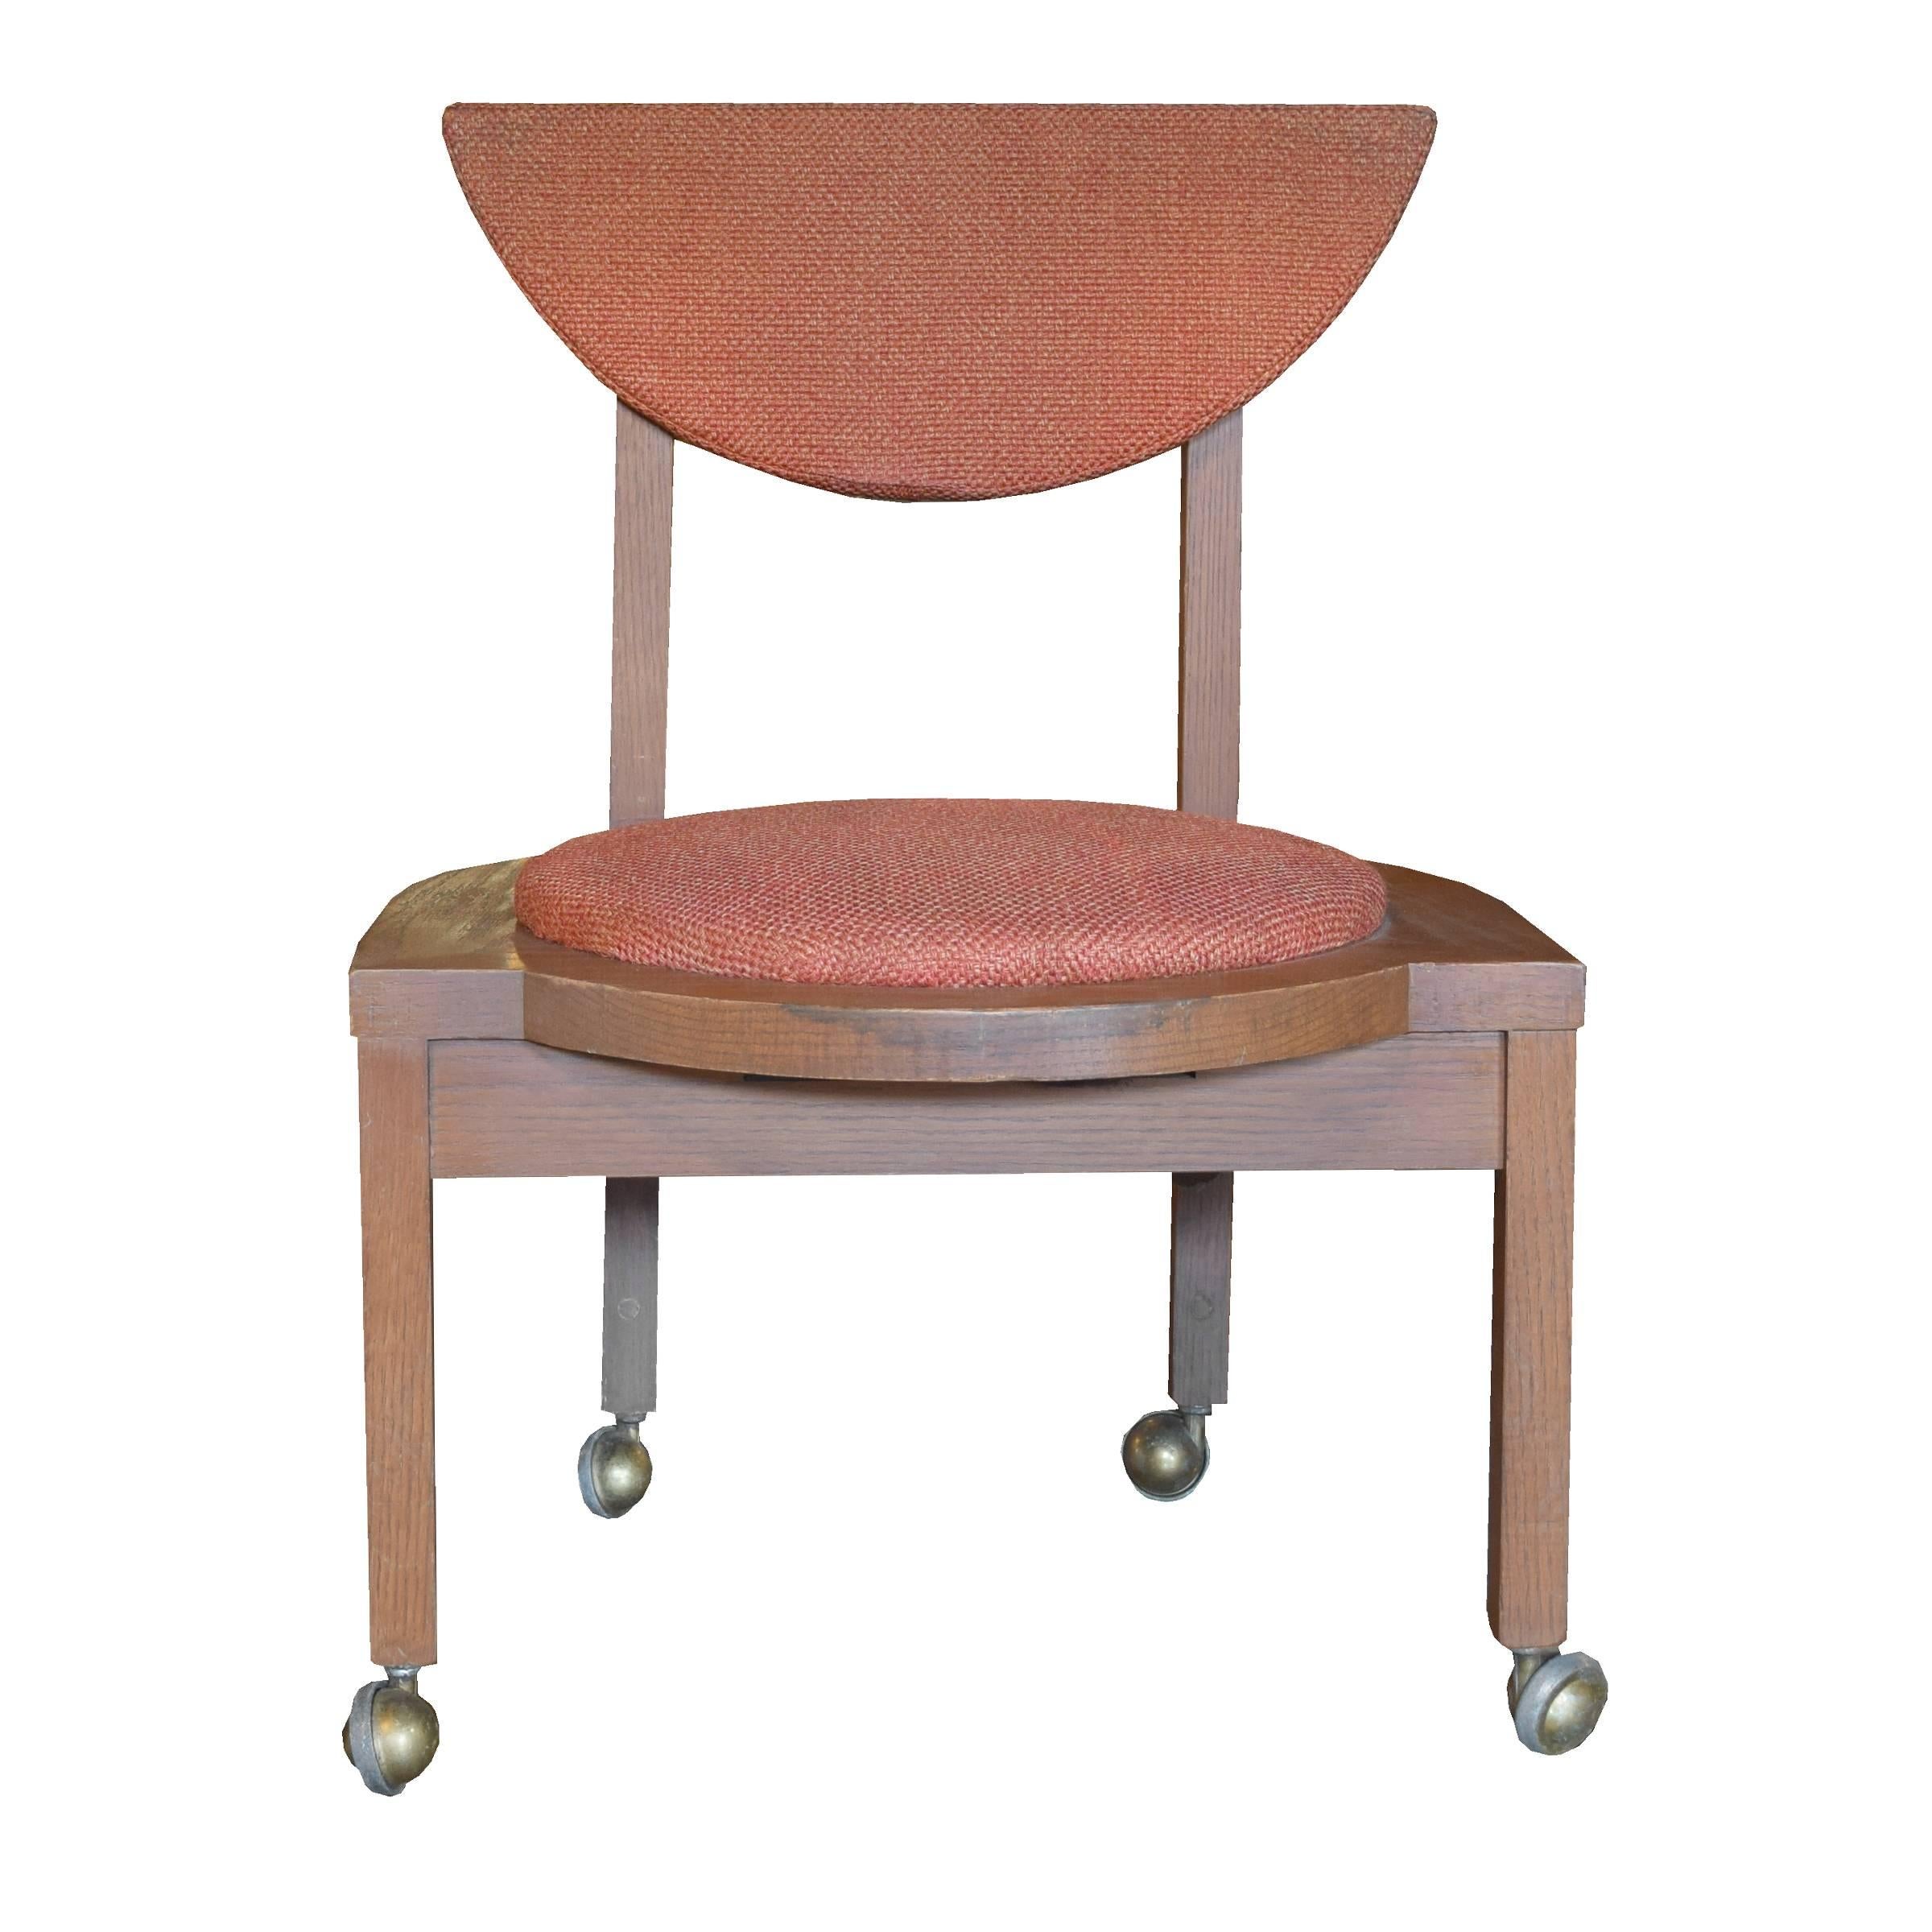 American Pair of Frank Lloyd Wright Designed Side Chairs, 1953